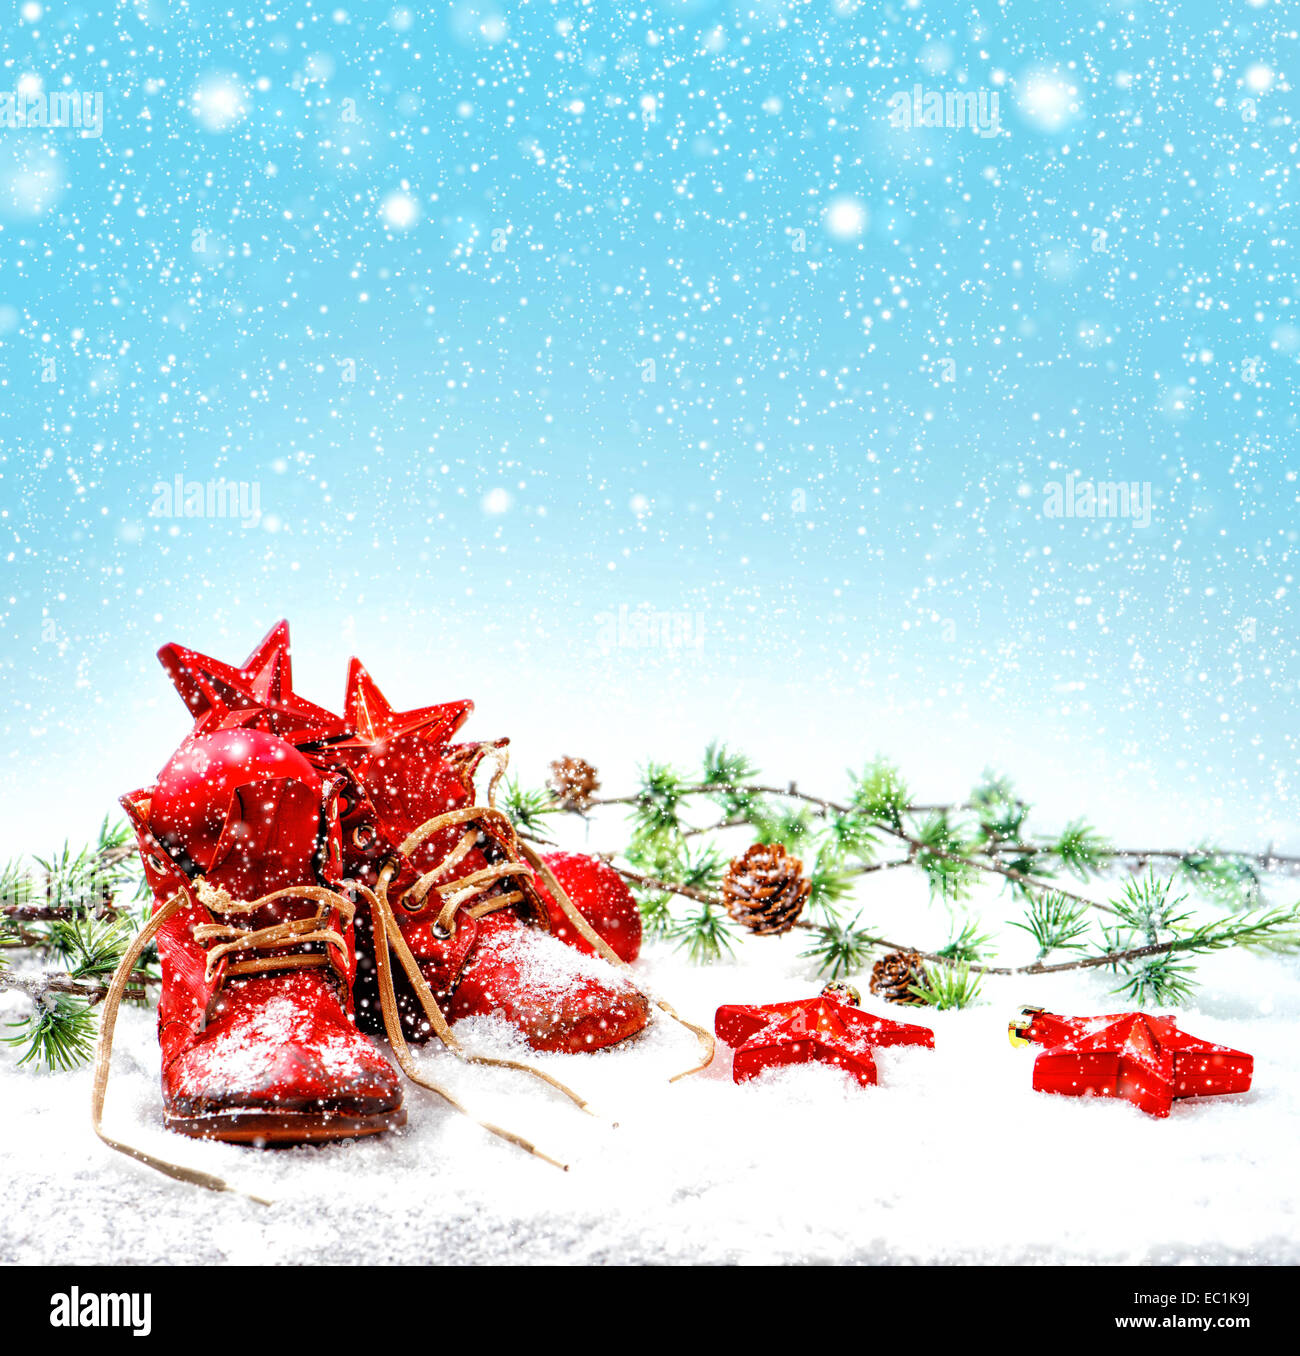 nostalgic christmas decoration with antique baby shoes. retro style toned picture with falling snow effect Stock Photo